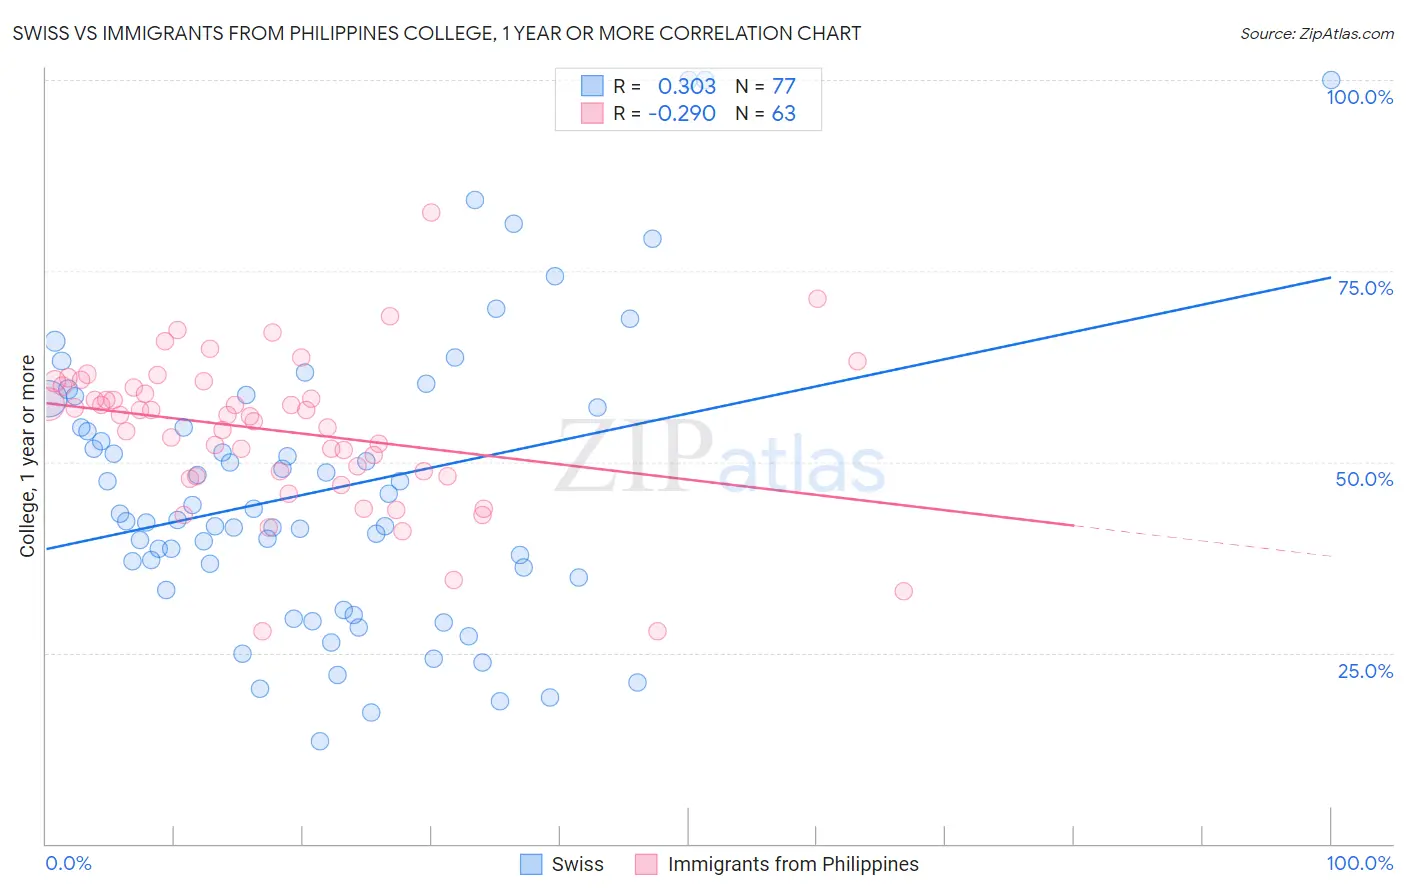 Swiss vs Immigrants from Philippines College, 1 year or more